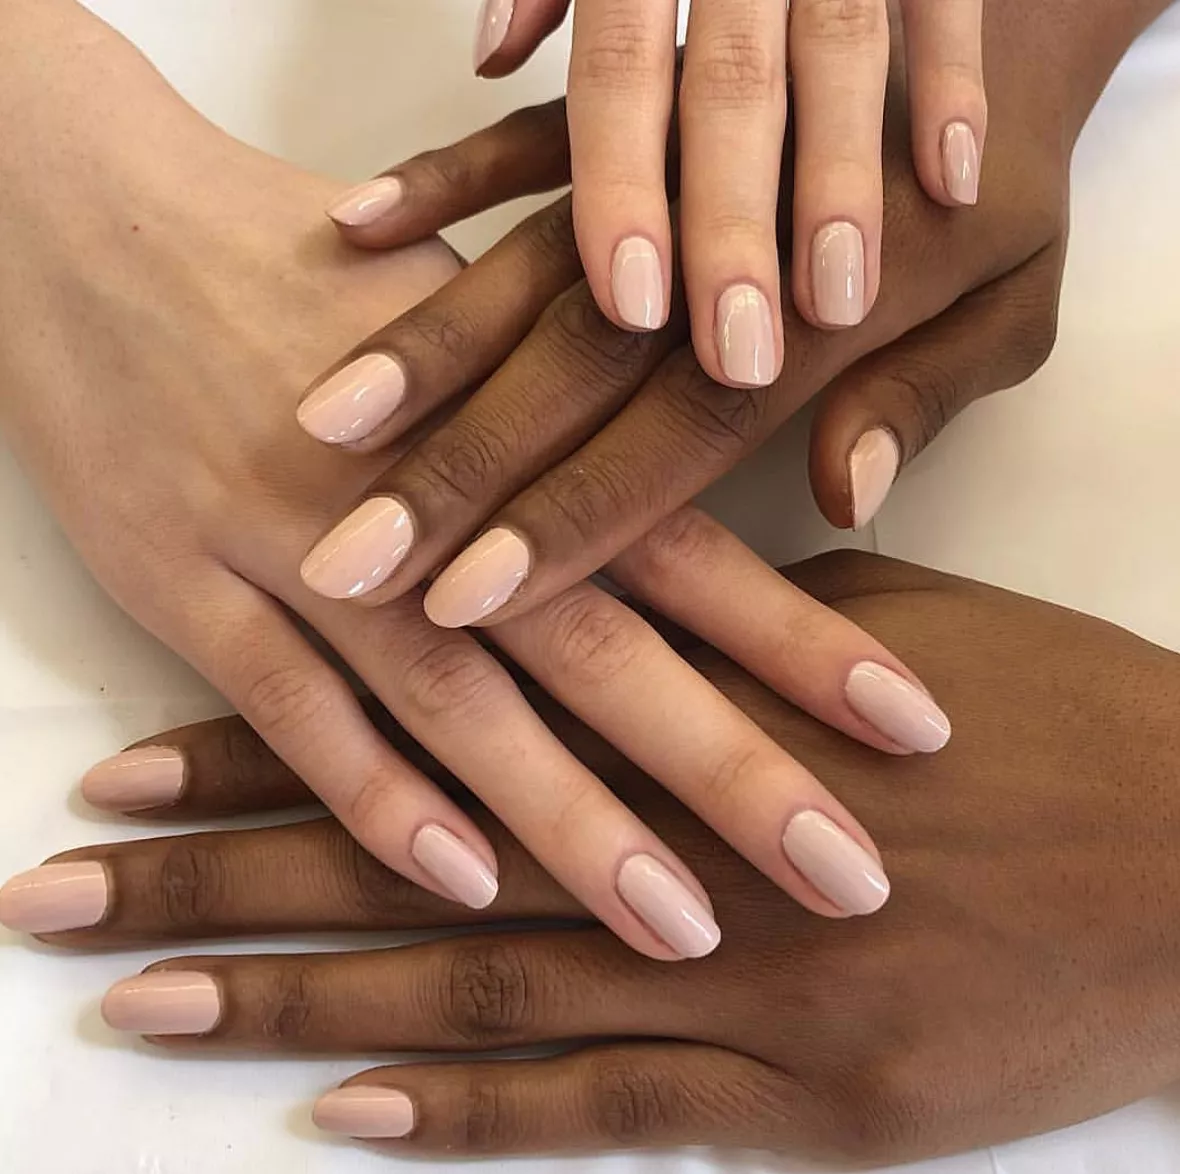 Caucasian and African American hands layered over one another, all featuring nude fingernails.